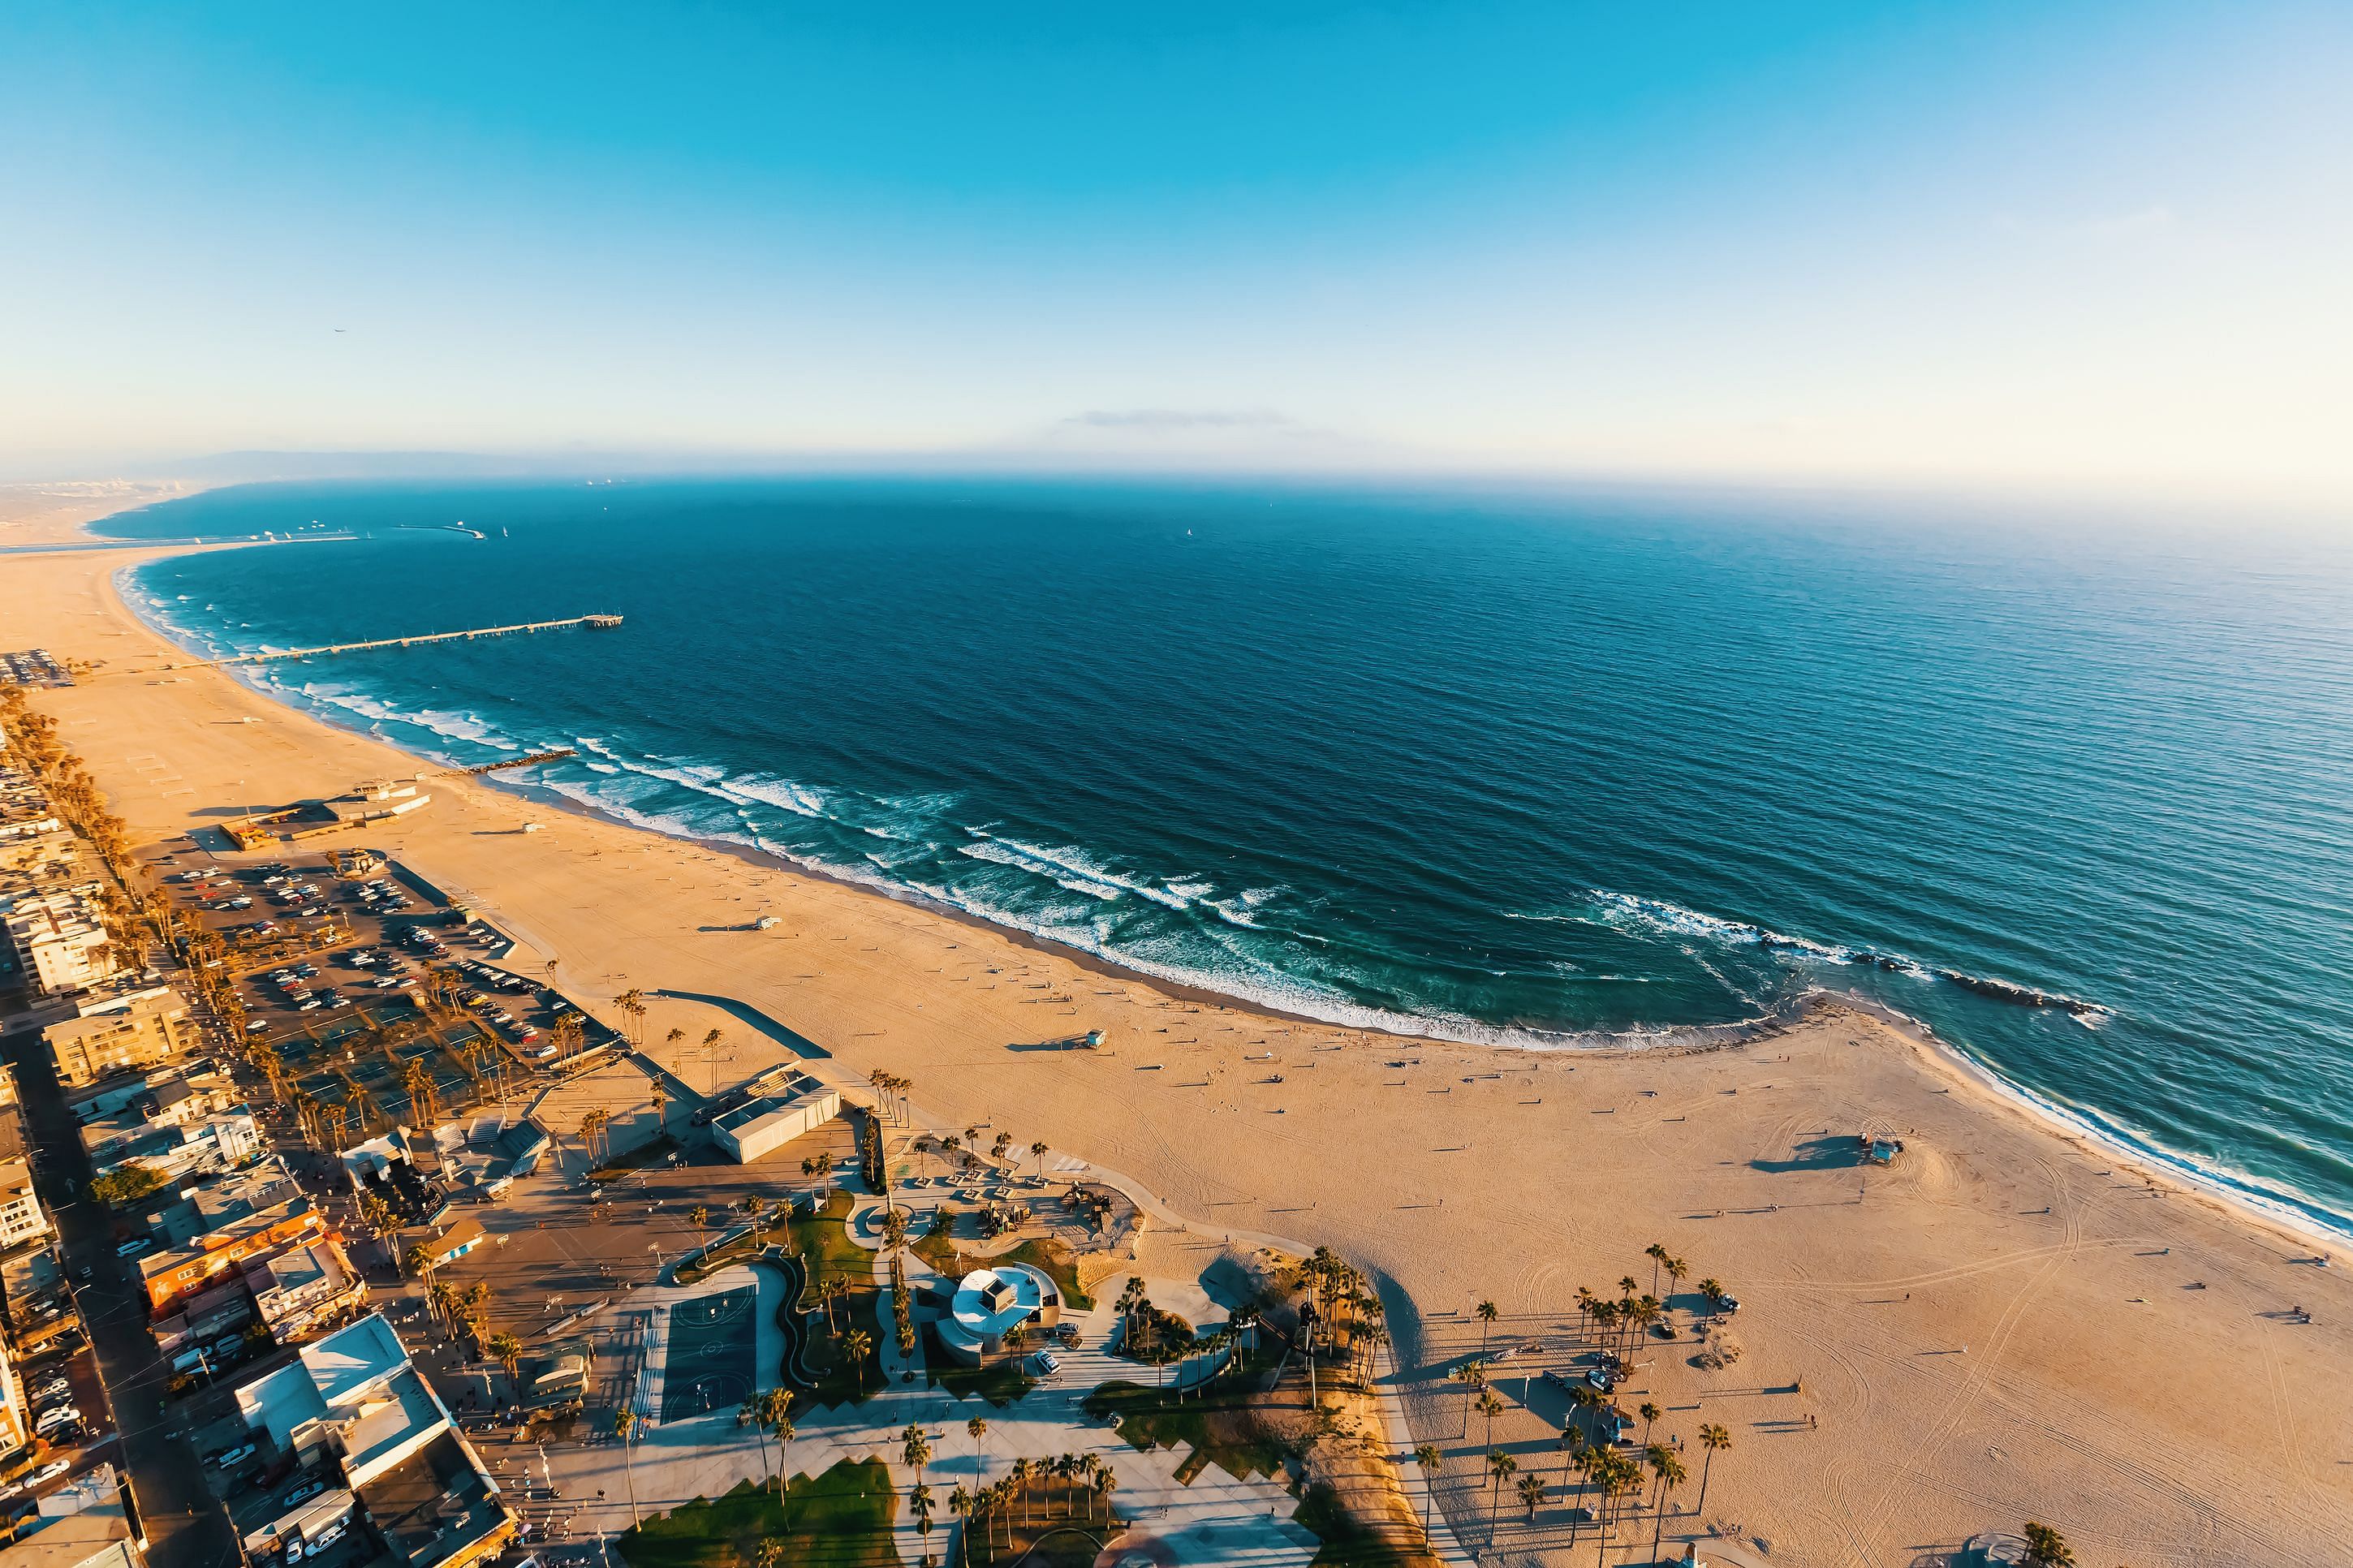 An aerial view of Venice Beach, Los Angeles